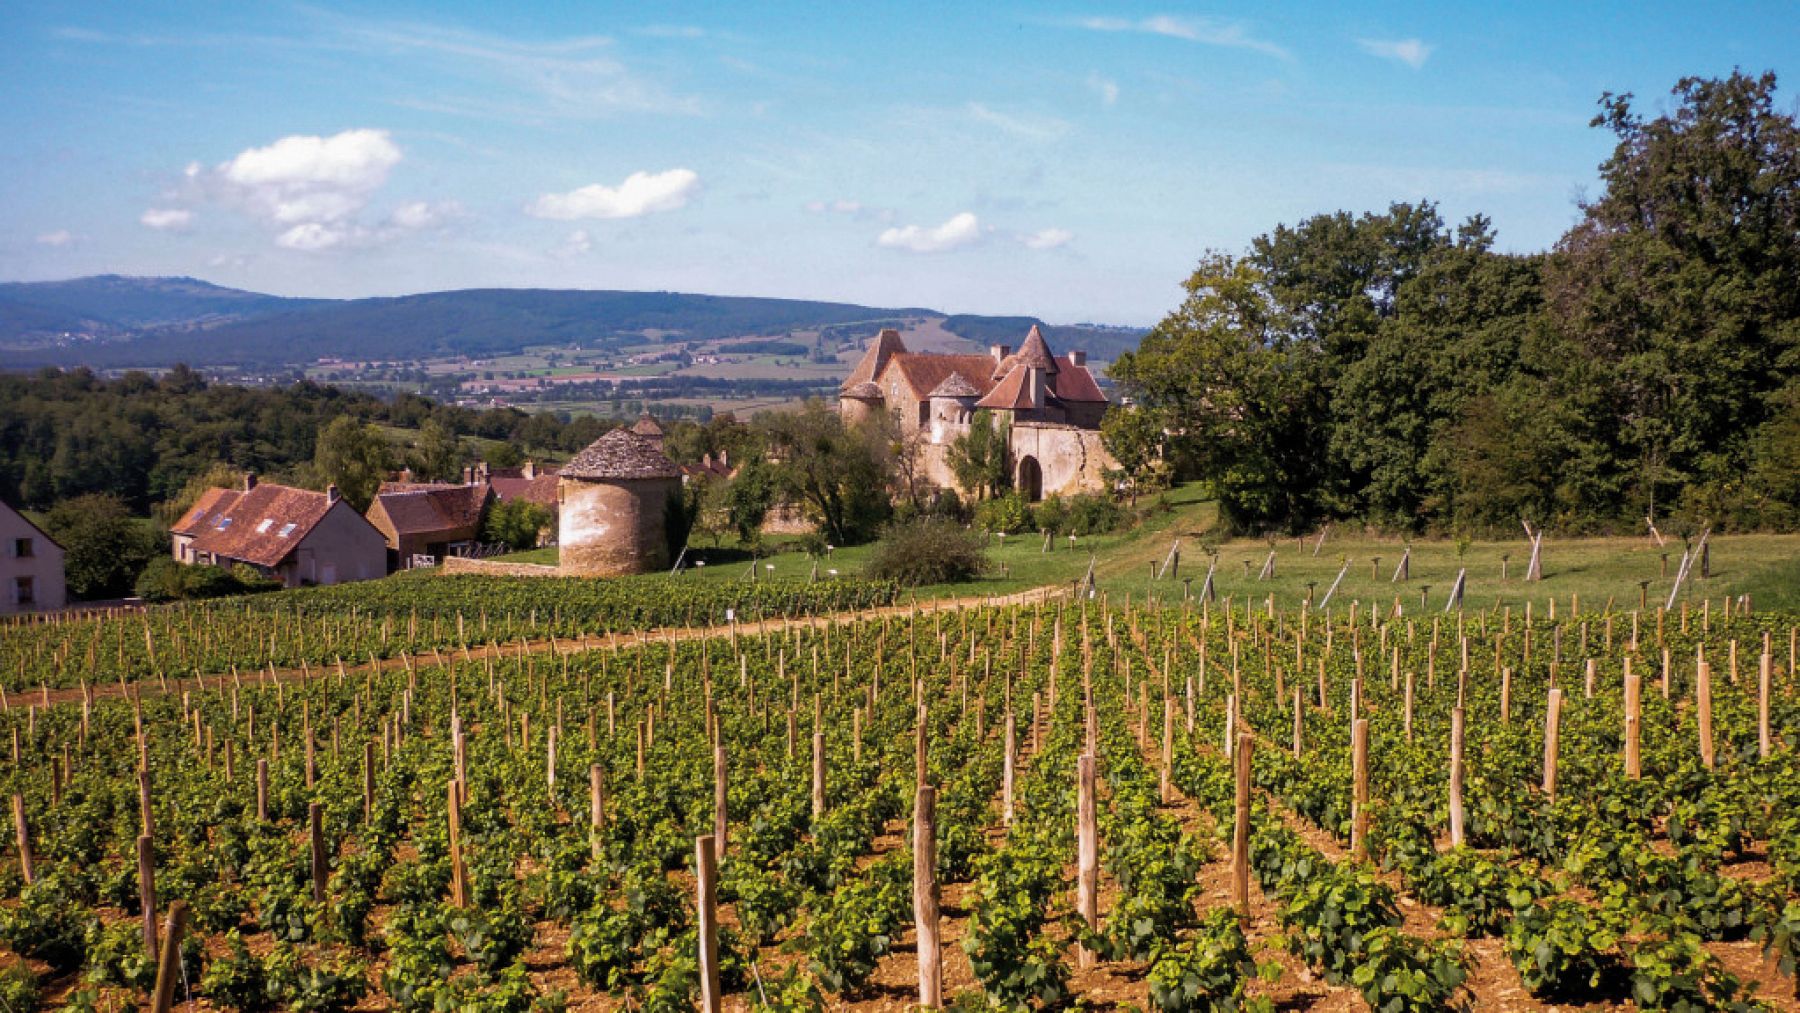 Burgundy wine traditions and techniques